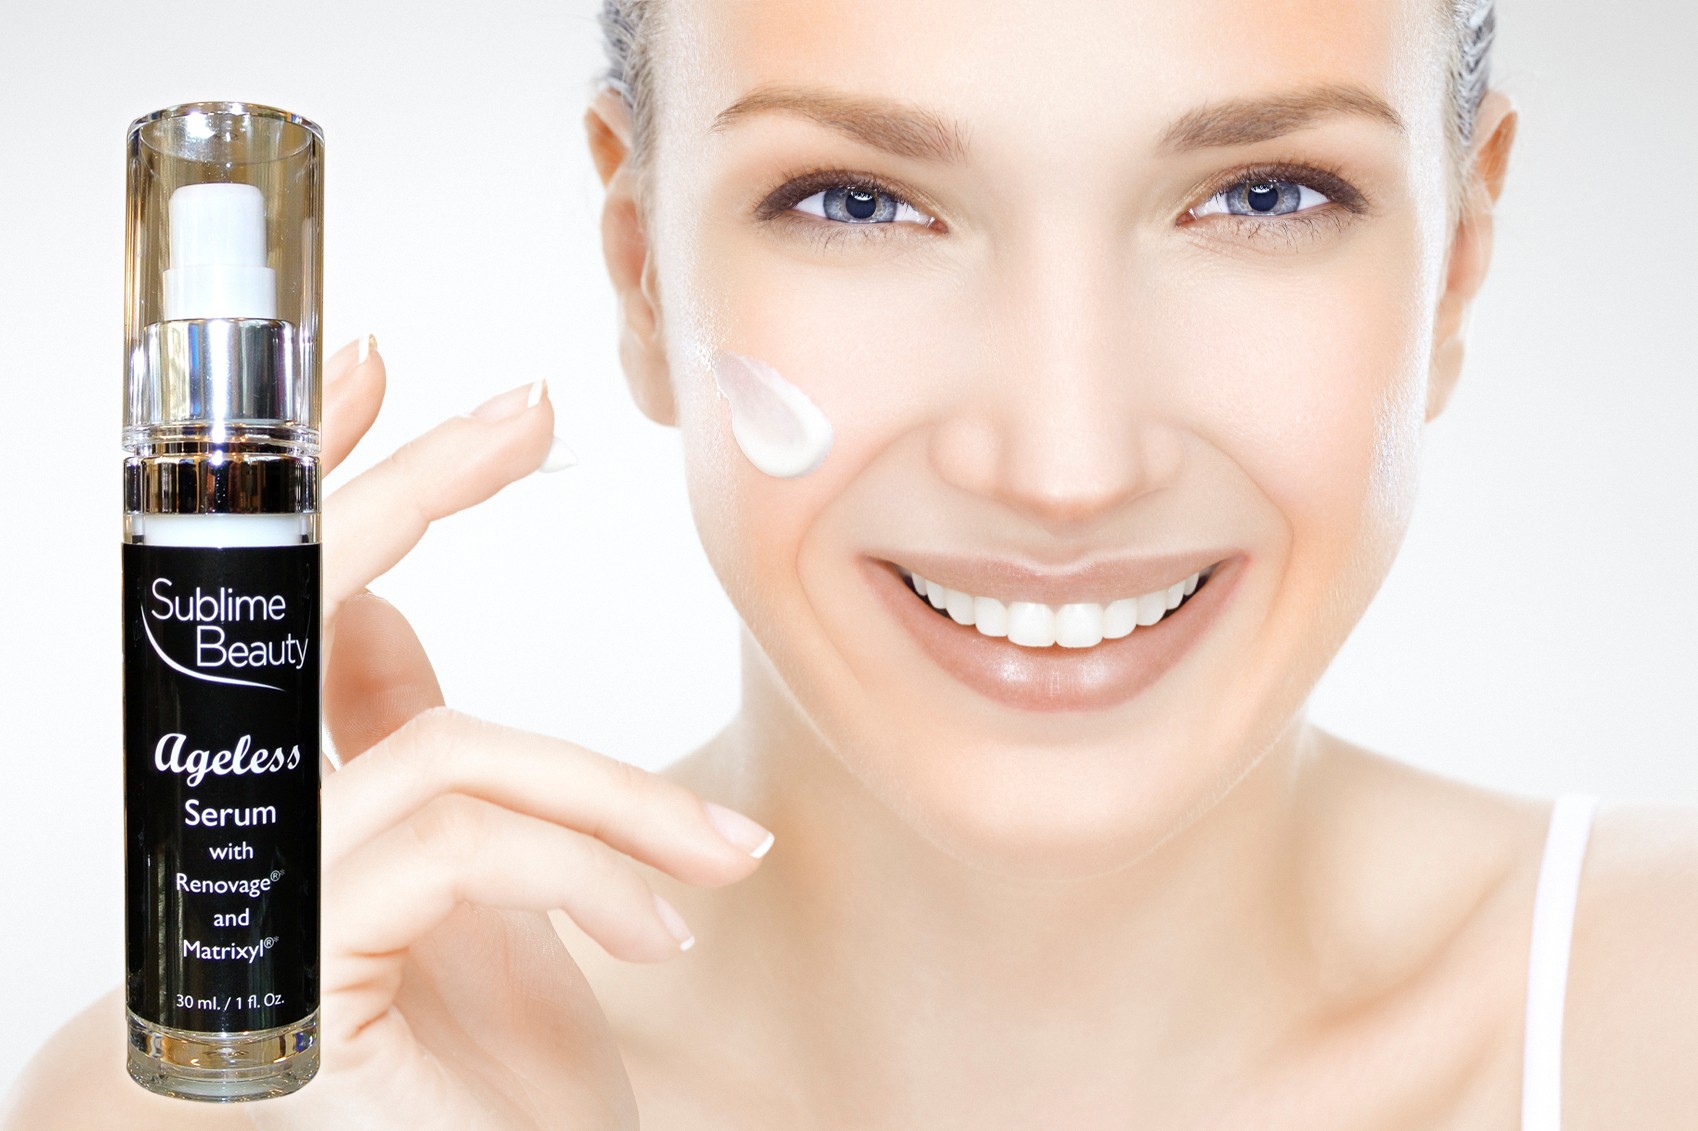 Diminish Major Signs Of Aging With The New Ageless Serum From Sublime 